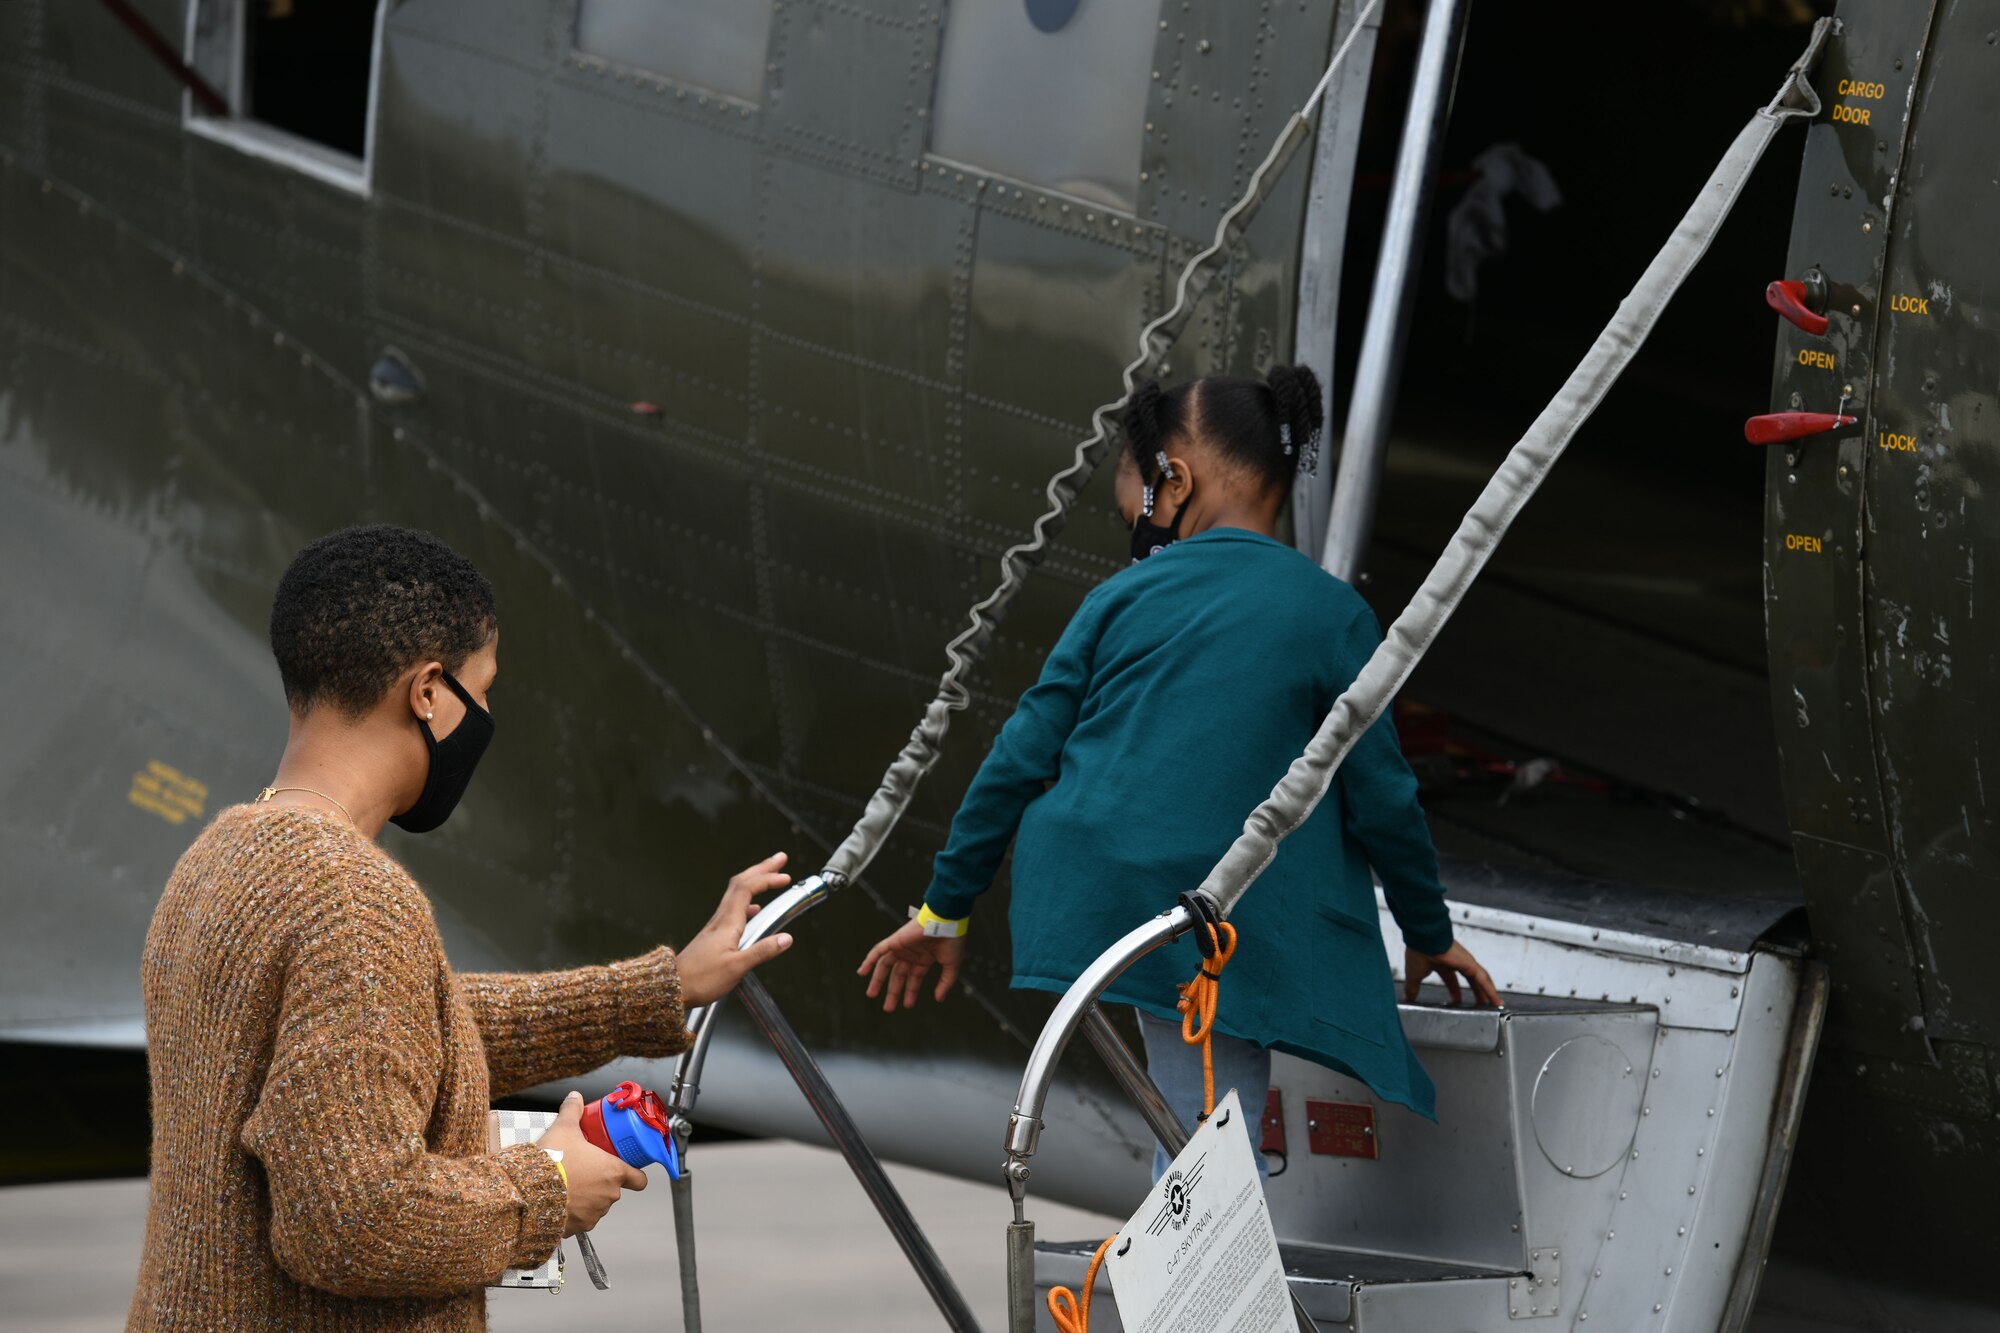 A woman and her child enter historical Aircraft